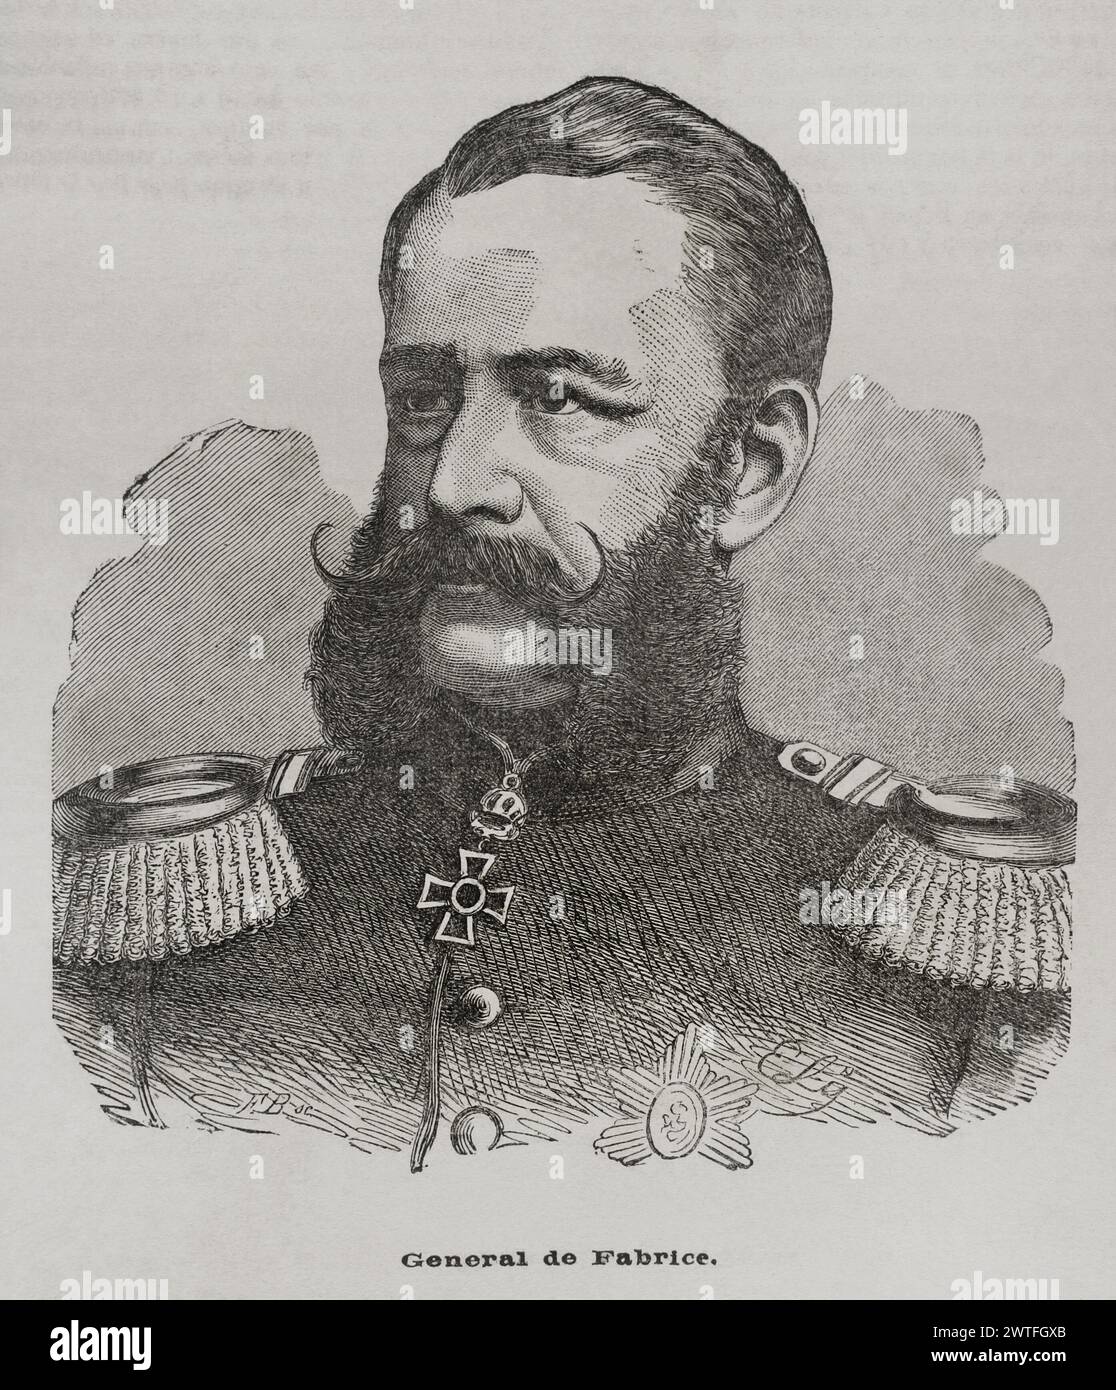 Alfred von Fabrice (Georg Friedrich Alfred von Fabrice) (1818-1891). Saxon cavalry general and politician. Minister of War (1866-1891) and president of the government of the Kingdom of Saxony (1876-1891). Portrait. Engraving. 'Historia de la Guerra de Francia y Prusia' (History of the War between France and Prussia). Volume II. Published in Barcelona, 1871. Stock Photo